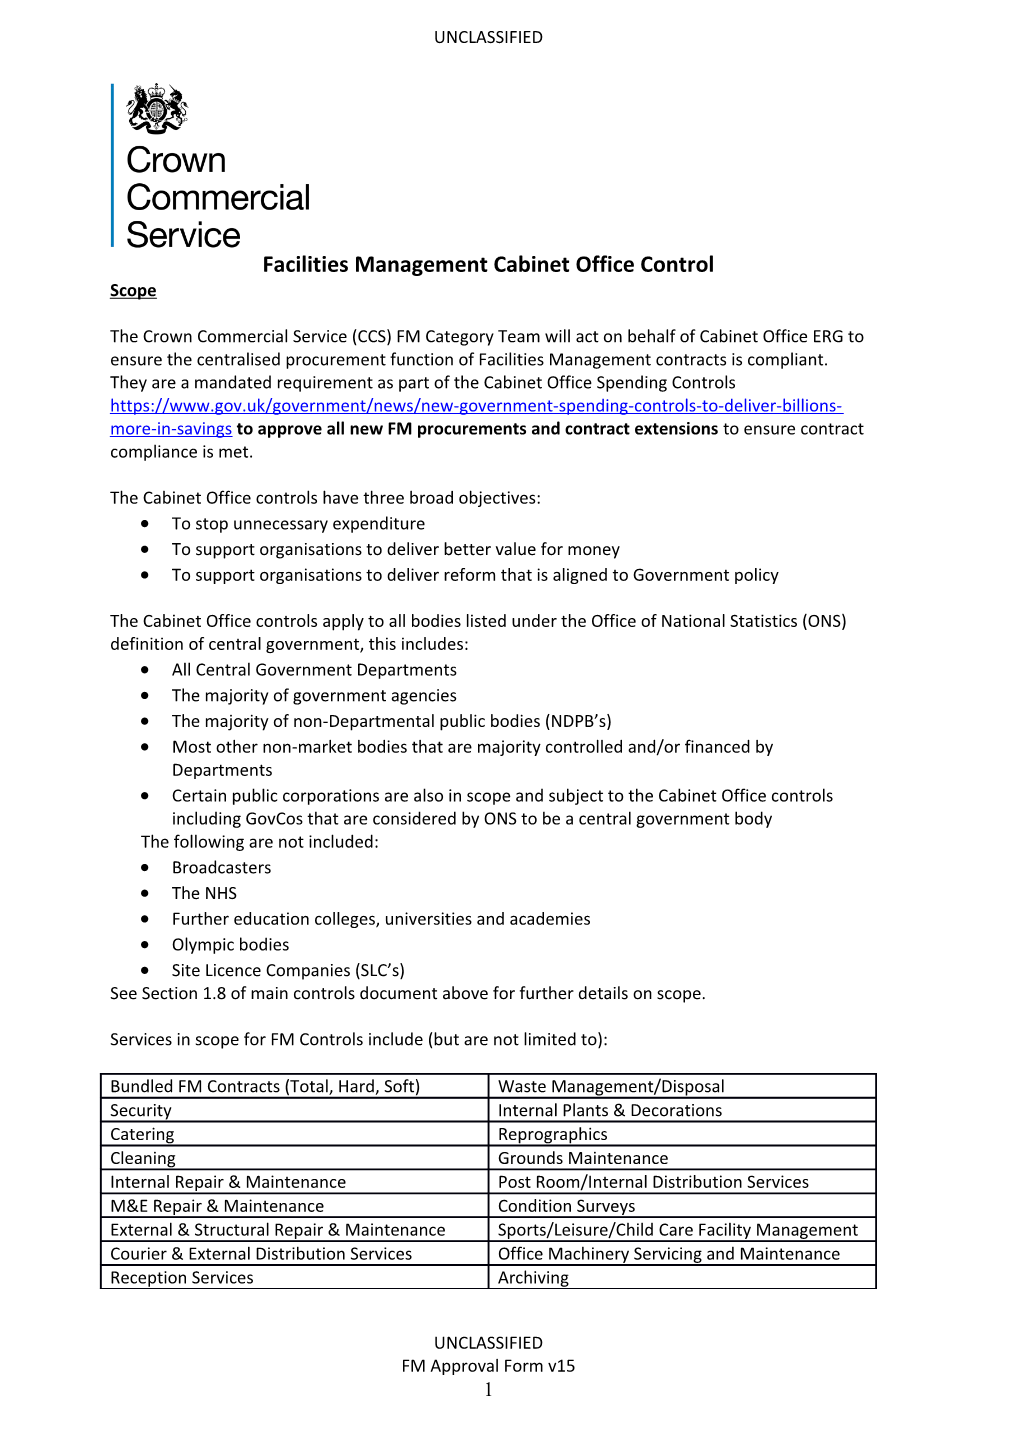 Facilities Management Cabinet Office Control